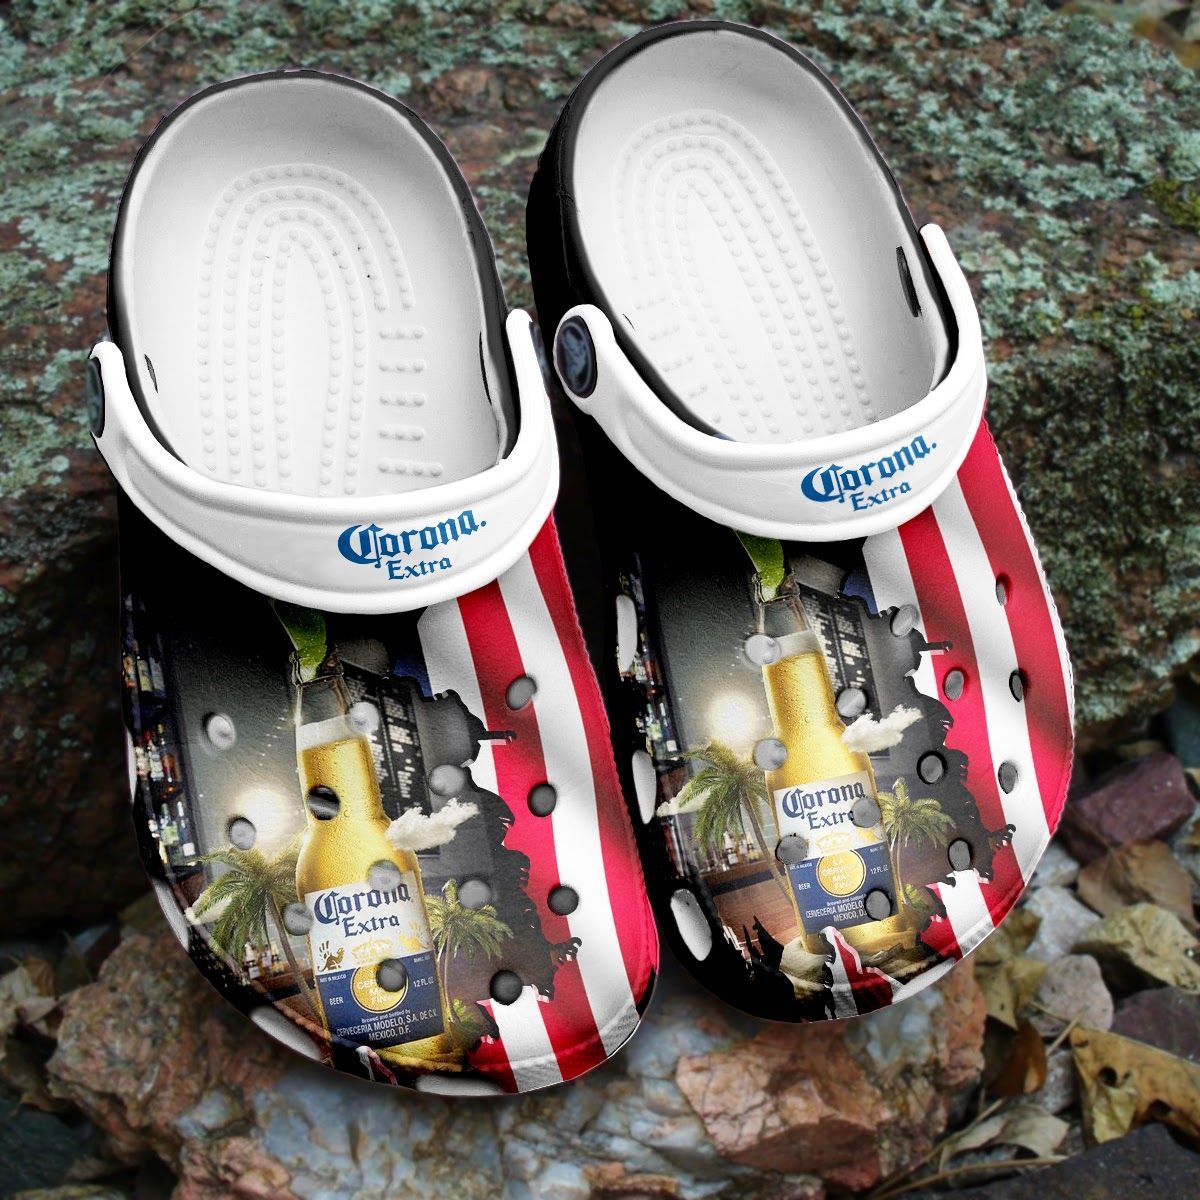 If you'd like to purchase a pair of Crocband Clogs, be sure to check out the official website. 134